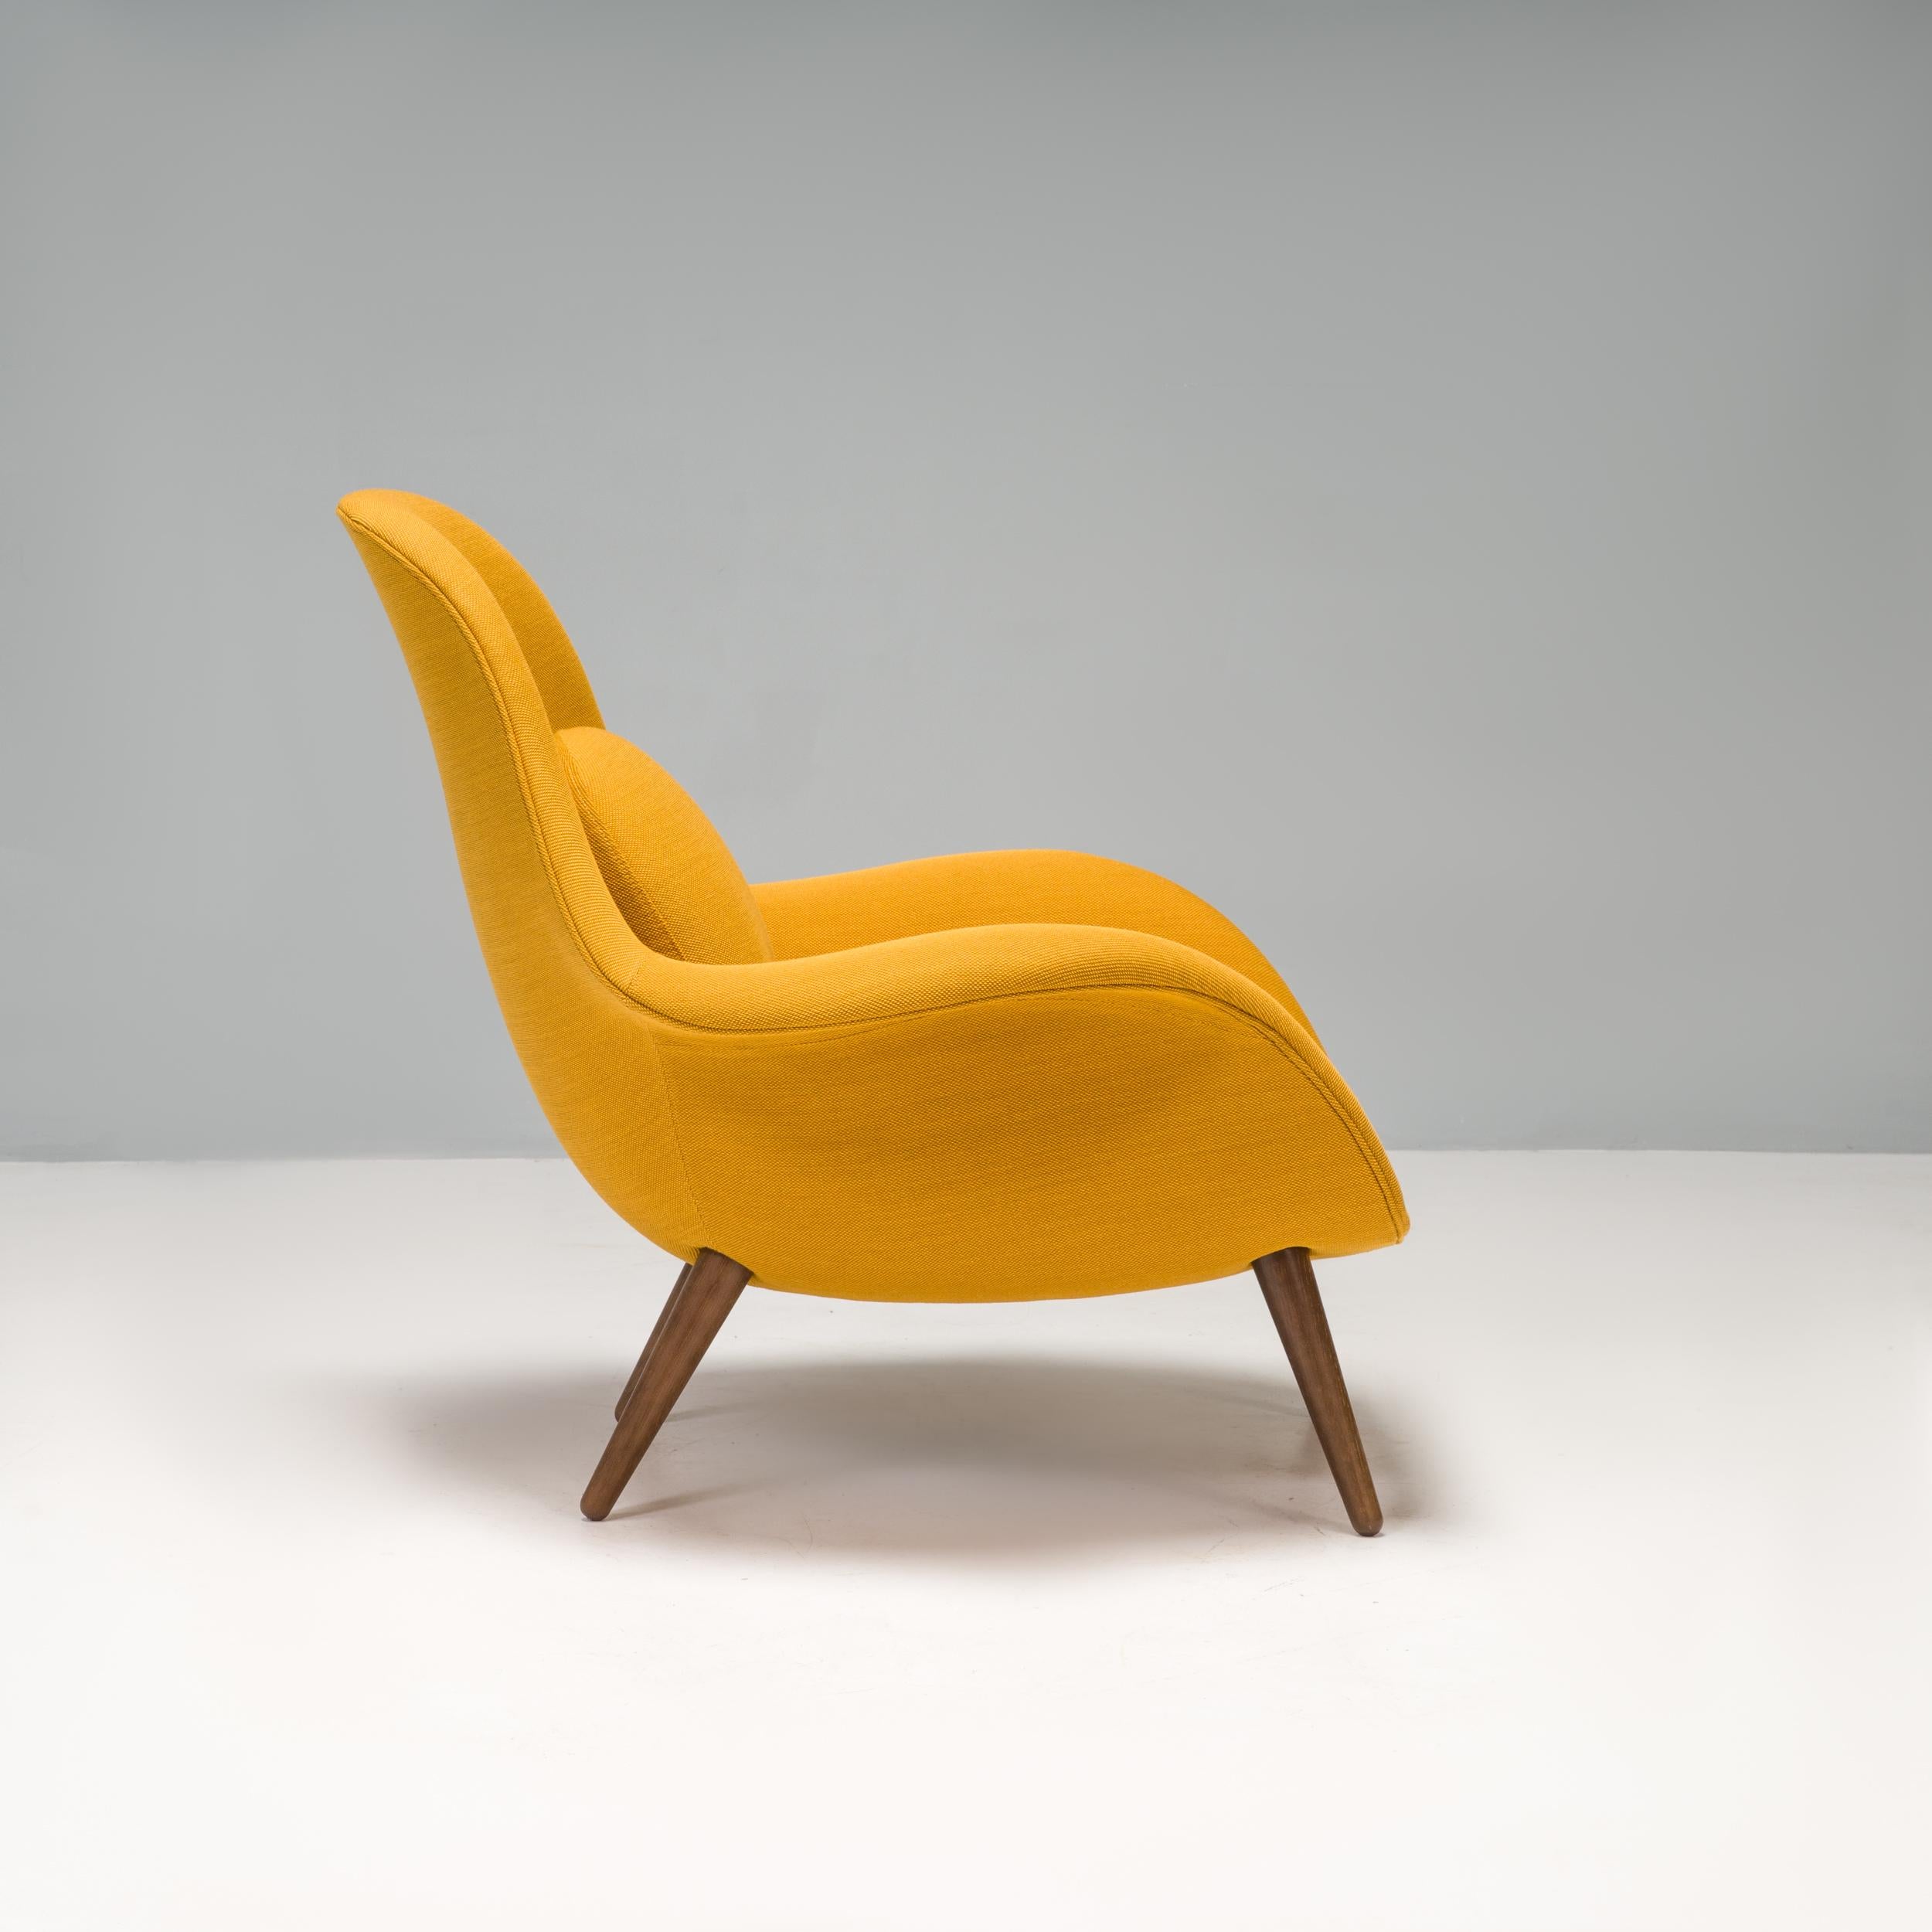 Danish Fredericia by Space Copenhagen Mustard Yellow Fabric Swoon Lounge Armchair, 2021